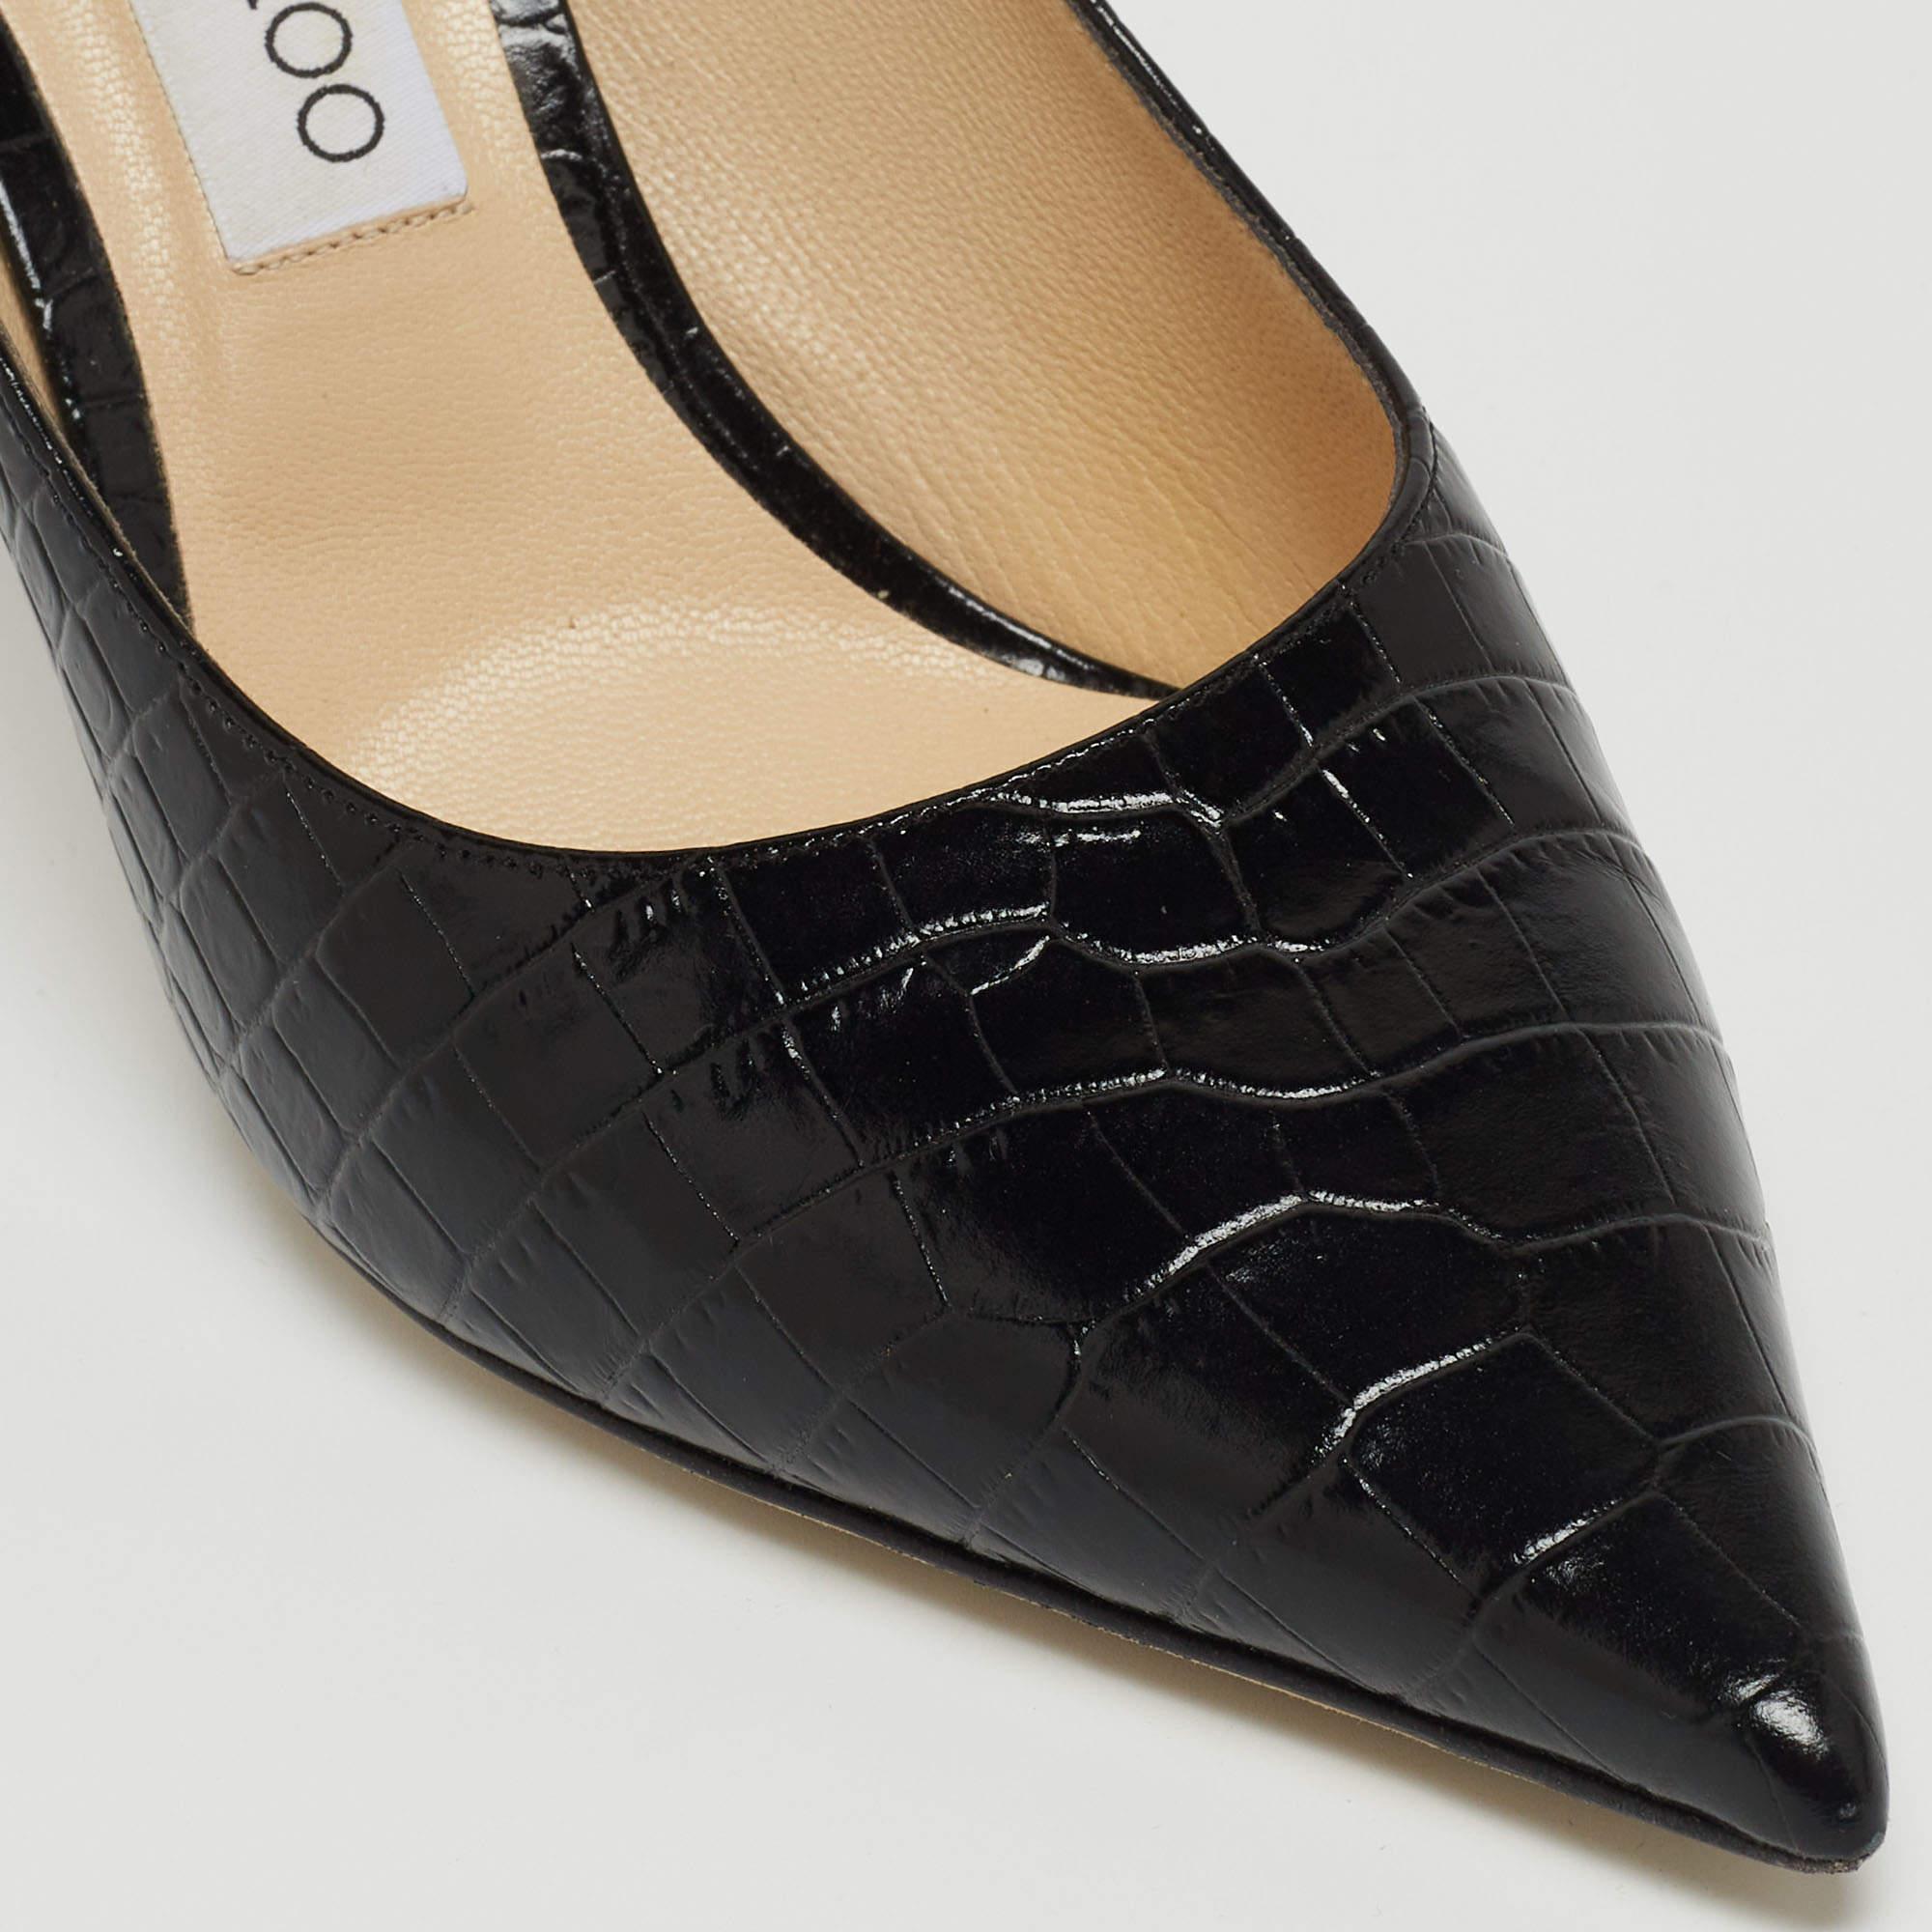 Jimmy Choo Black Croc Embossed Leather Love 85 Pointed Toe Pumps Size 39.5 4